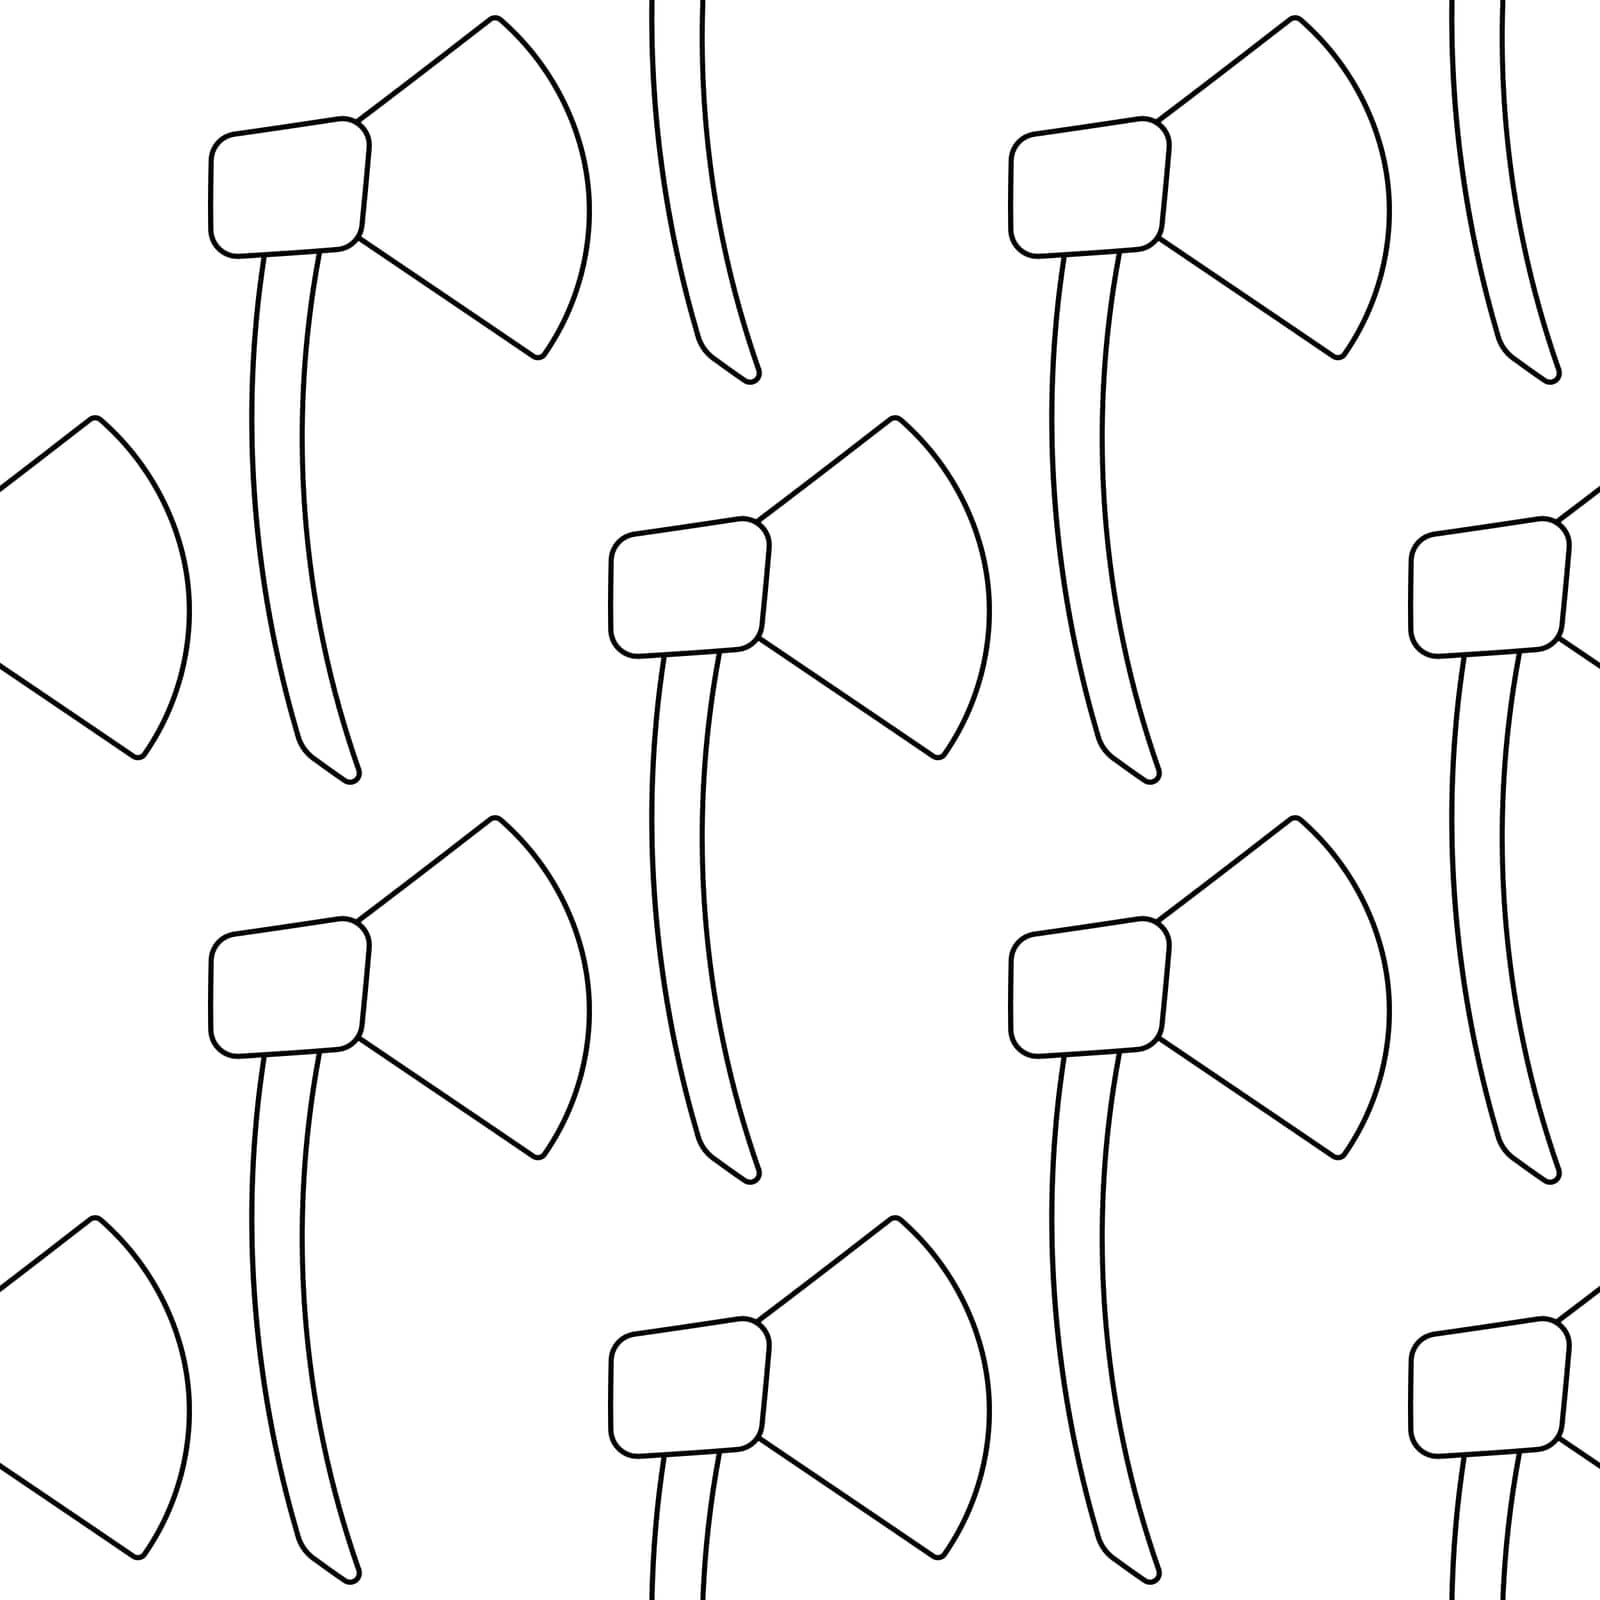 An ax is a metal tool with a wooden handle for use in the garden, at home, and outdoors. Sharp weapon. Chop wood and use it in construction. Hand drawn vector illustration. pattern, seamless, line.